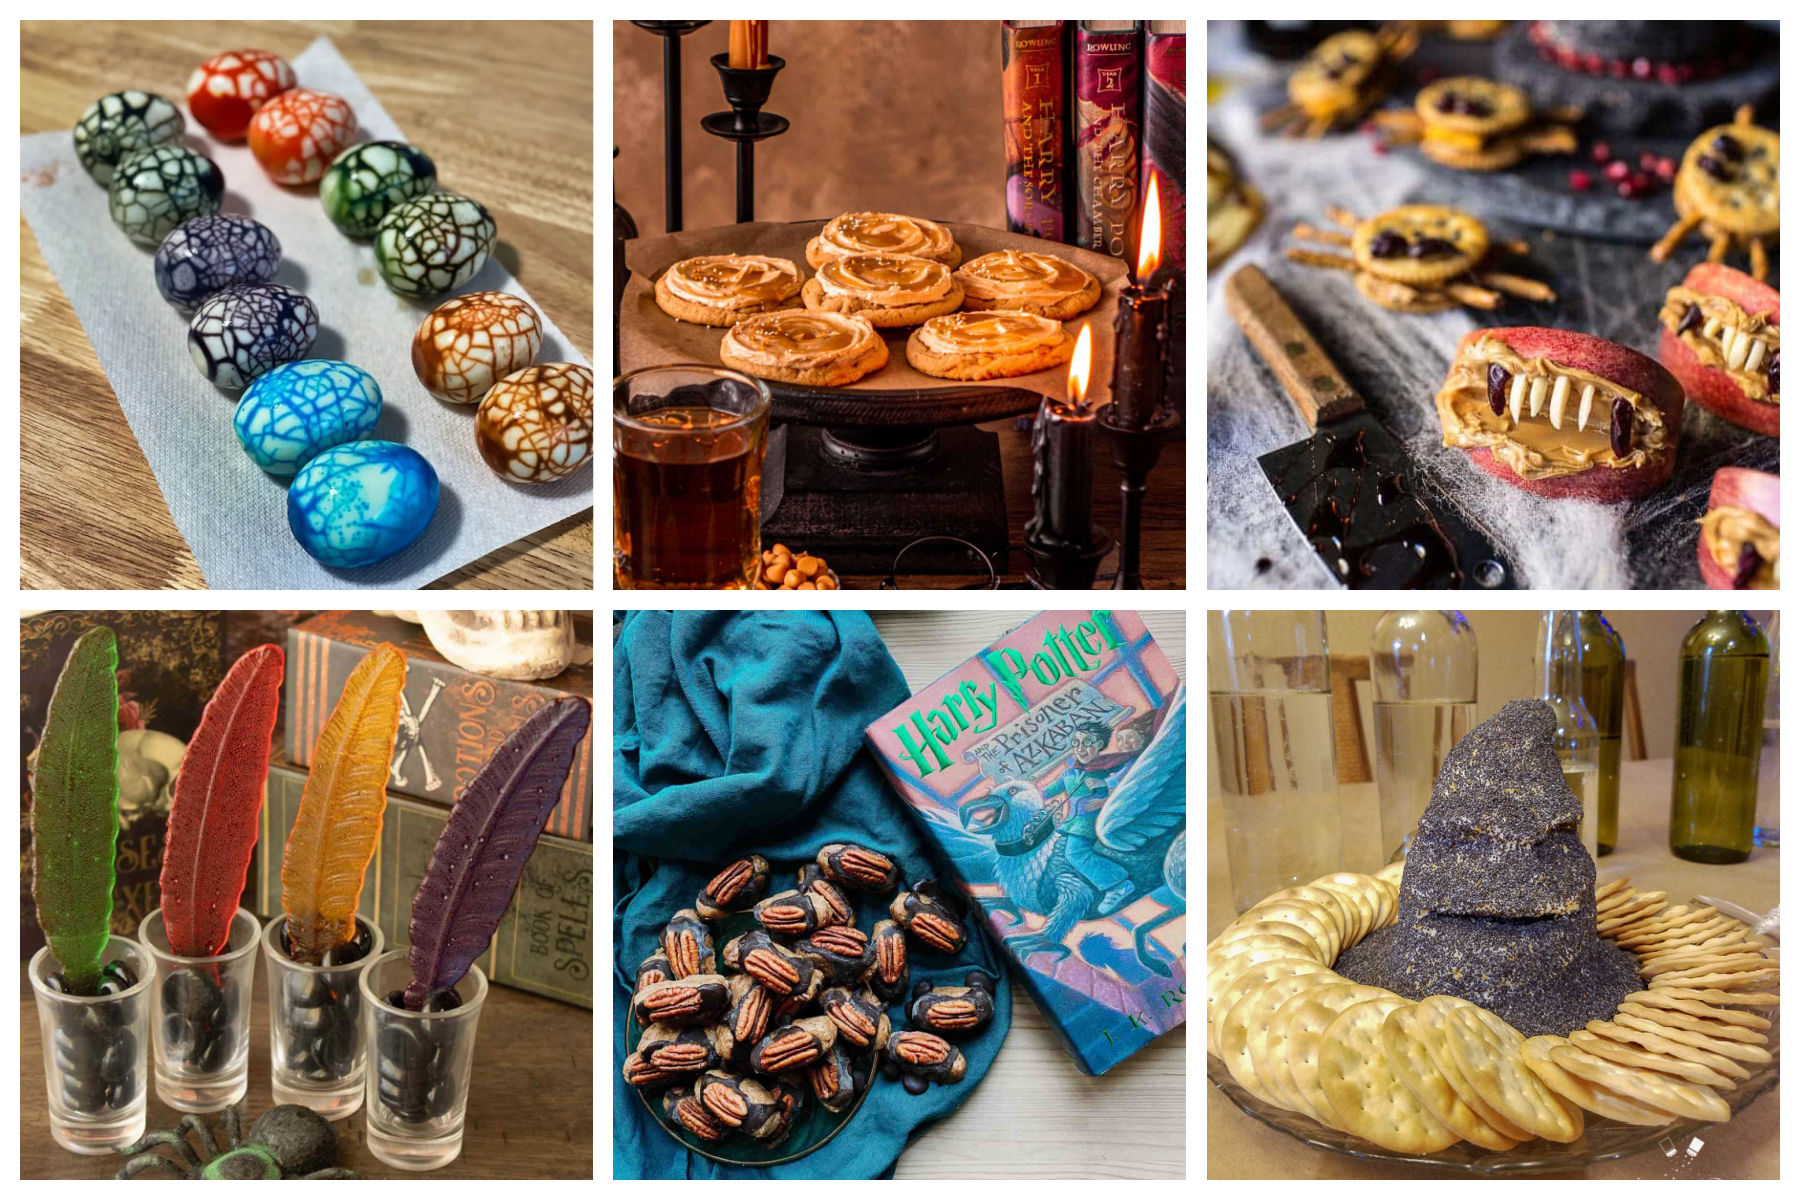 The Most Creative Harry Potter Party Ideas - My Mommy Style